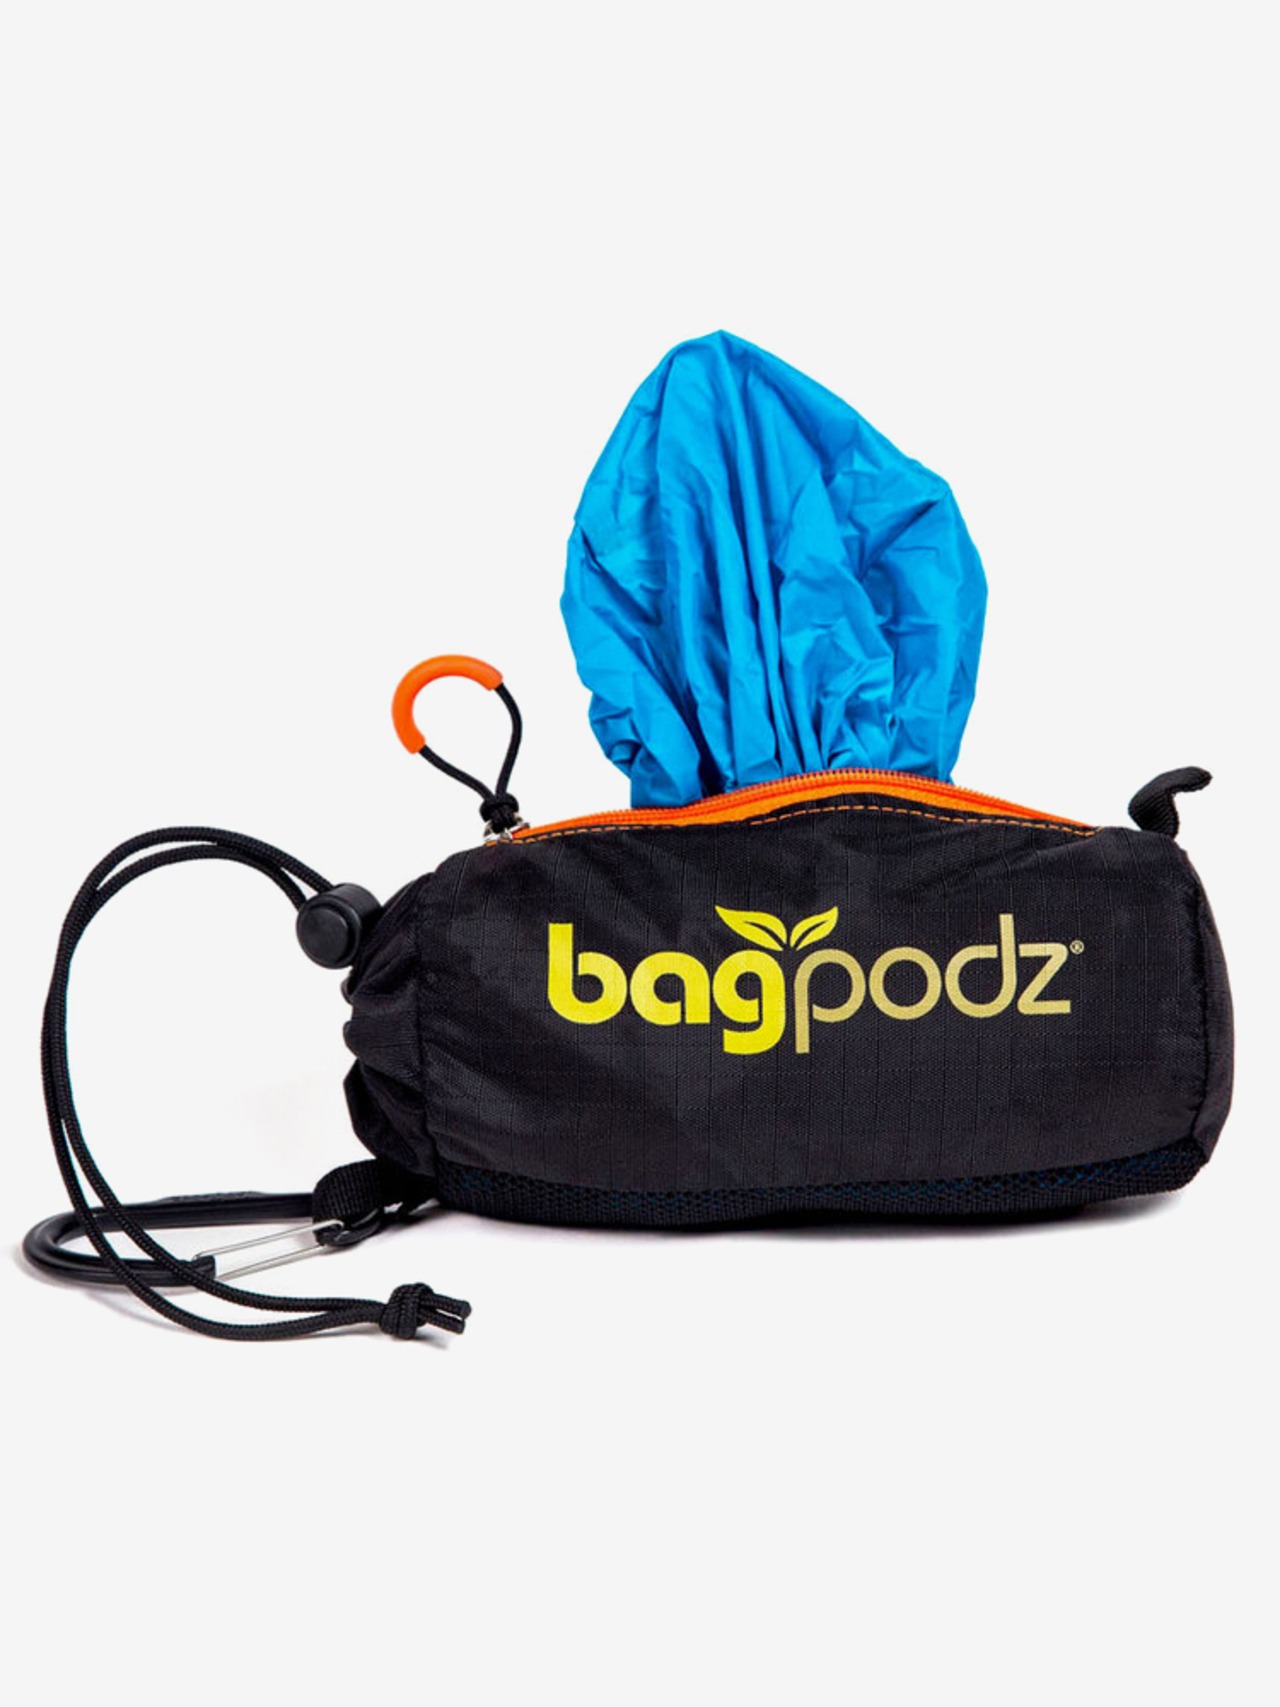 bagpodz「5 bags Blue（コンパクト エコバッグ）」